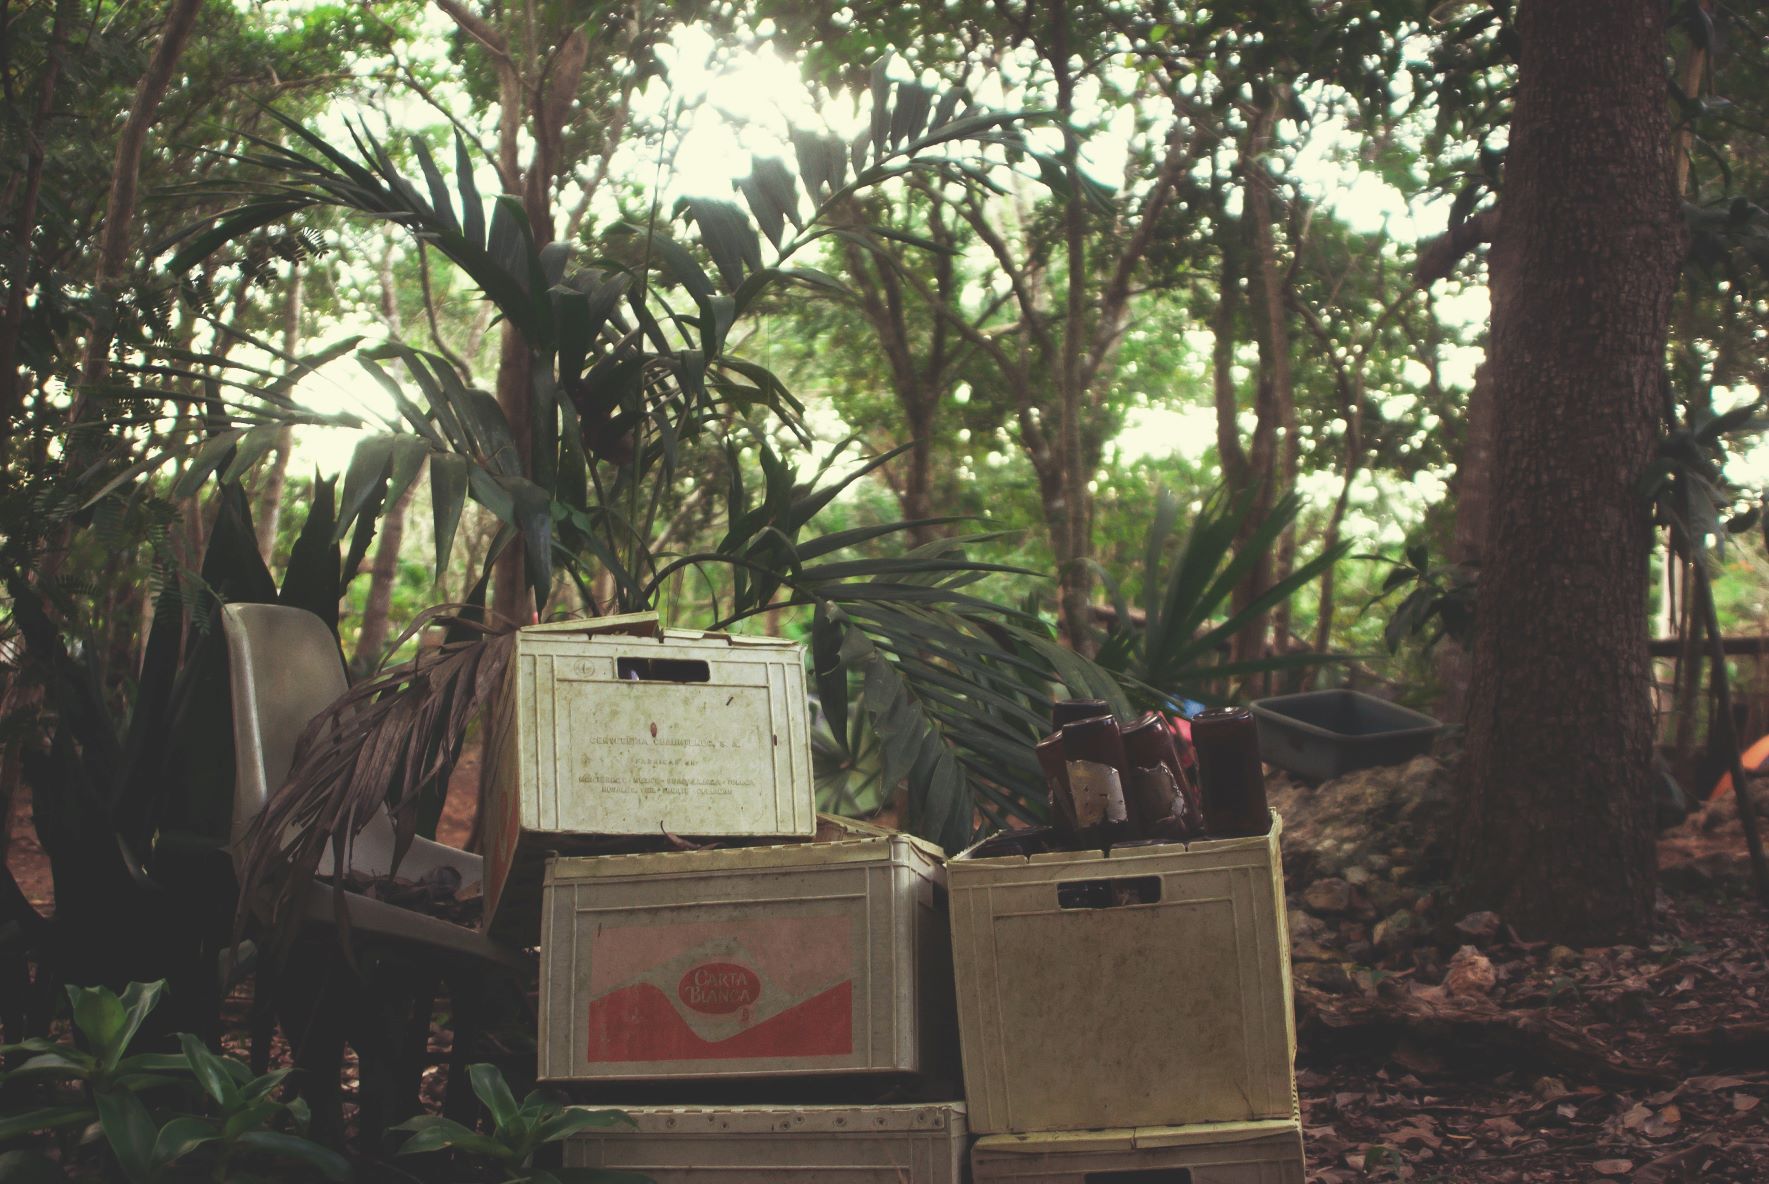 Trash in a jungle - image by Jorge Zapata from Unsplash